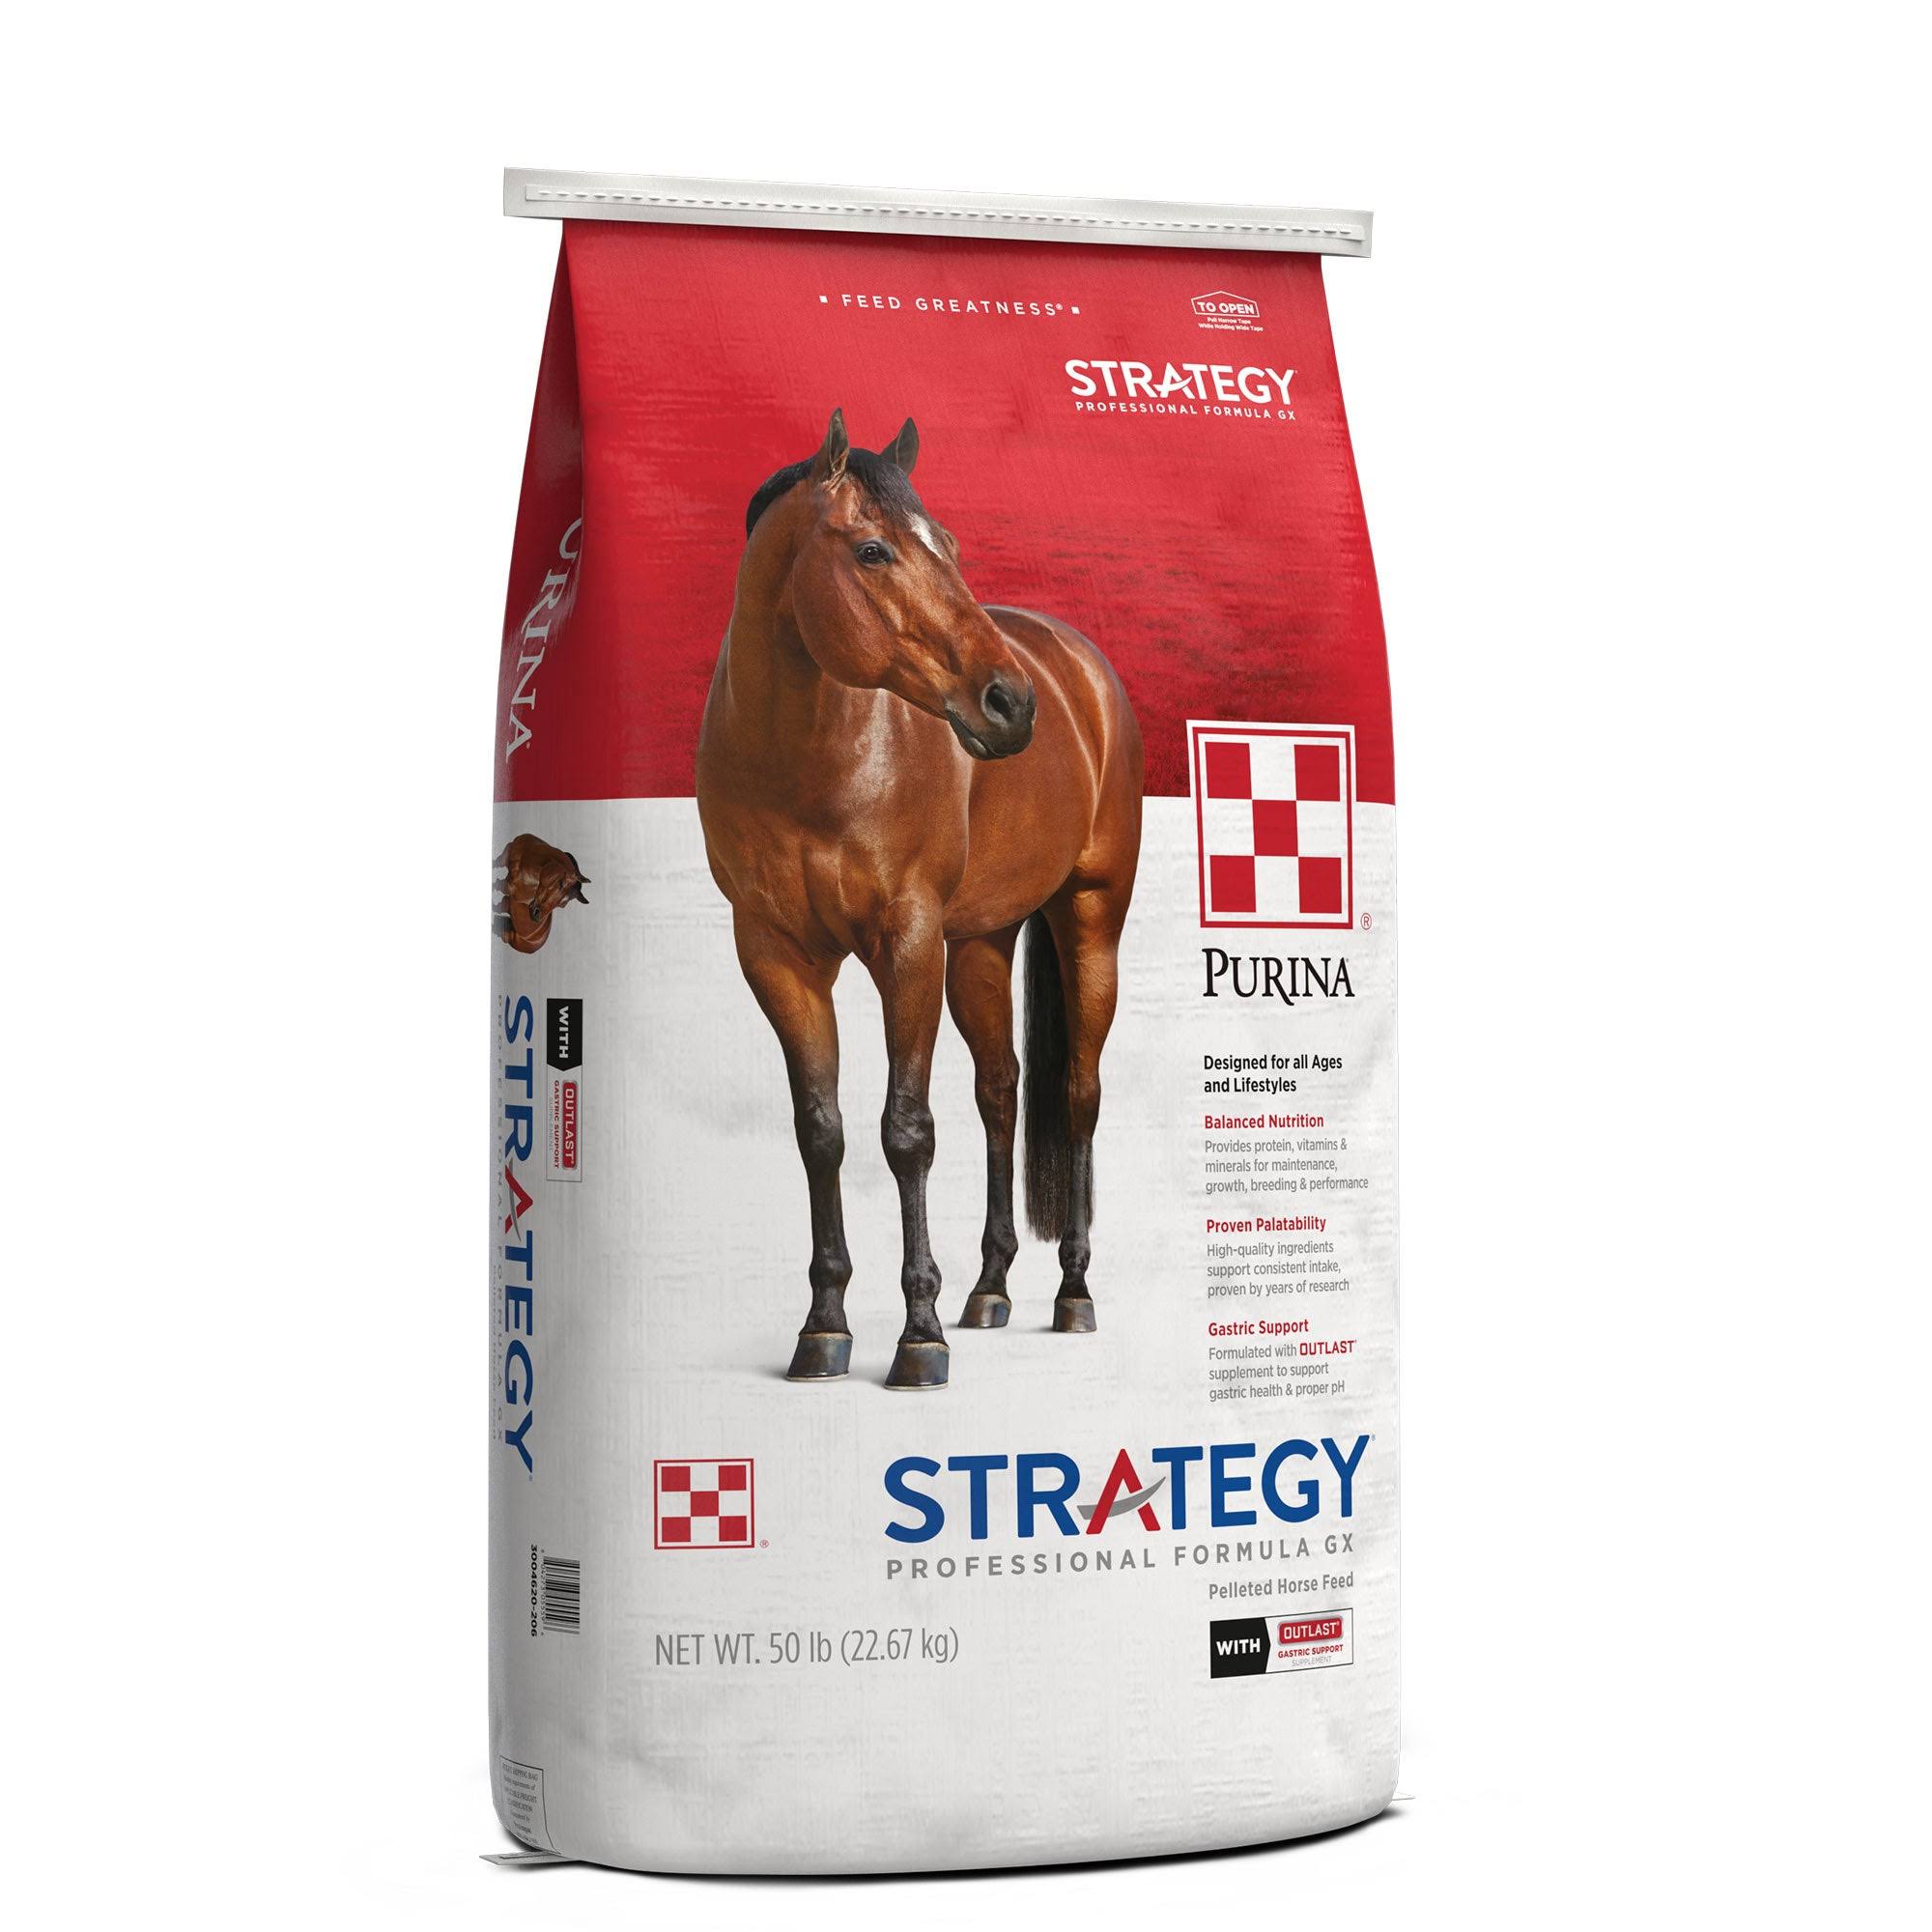 Purina 3004620-206 Strategy Professional Formula GX Horse Feed in 50 lbs. Pack